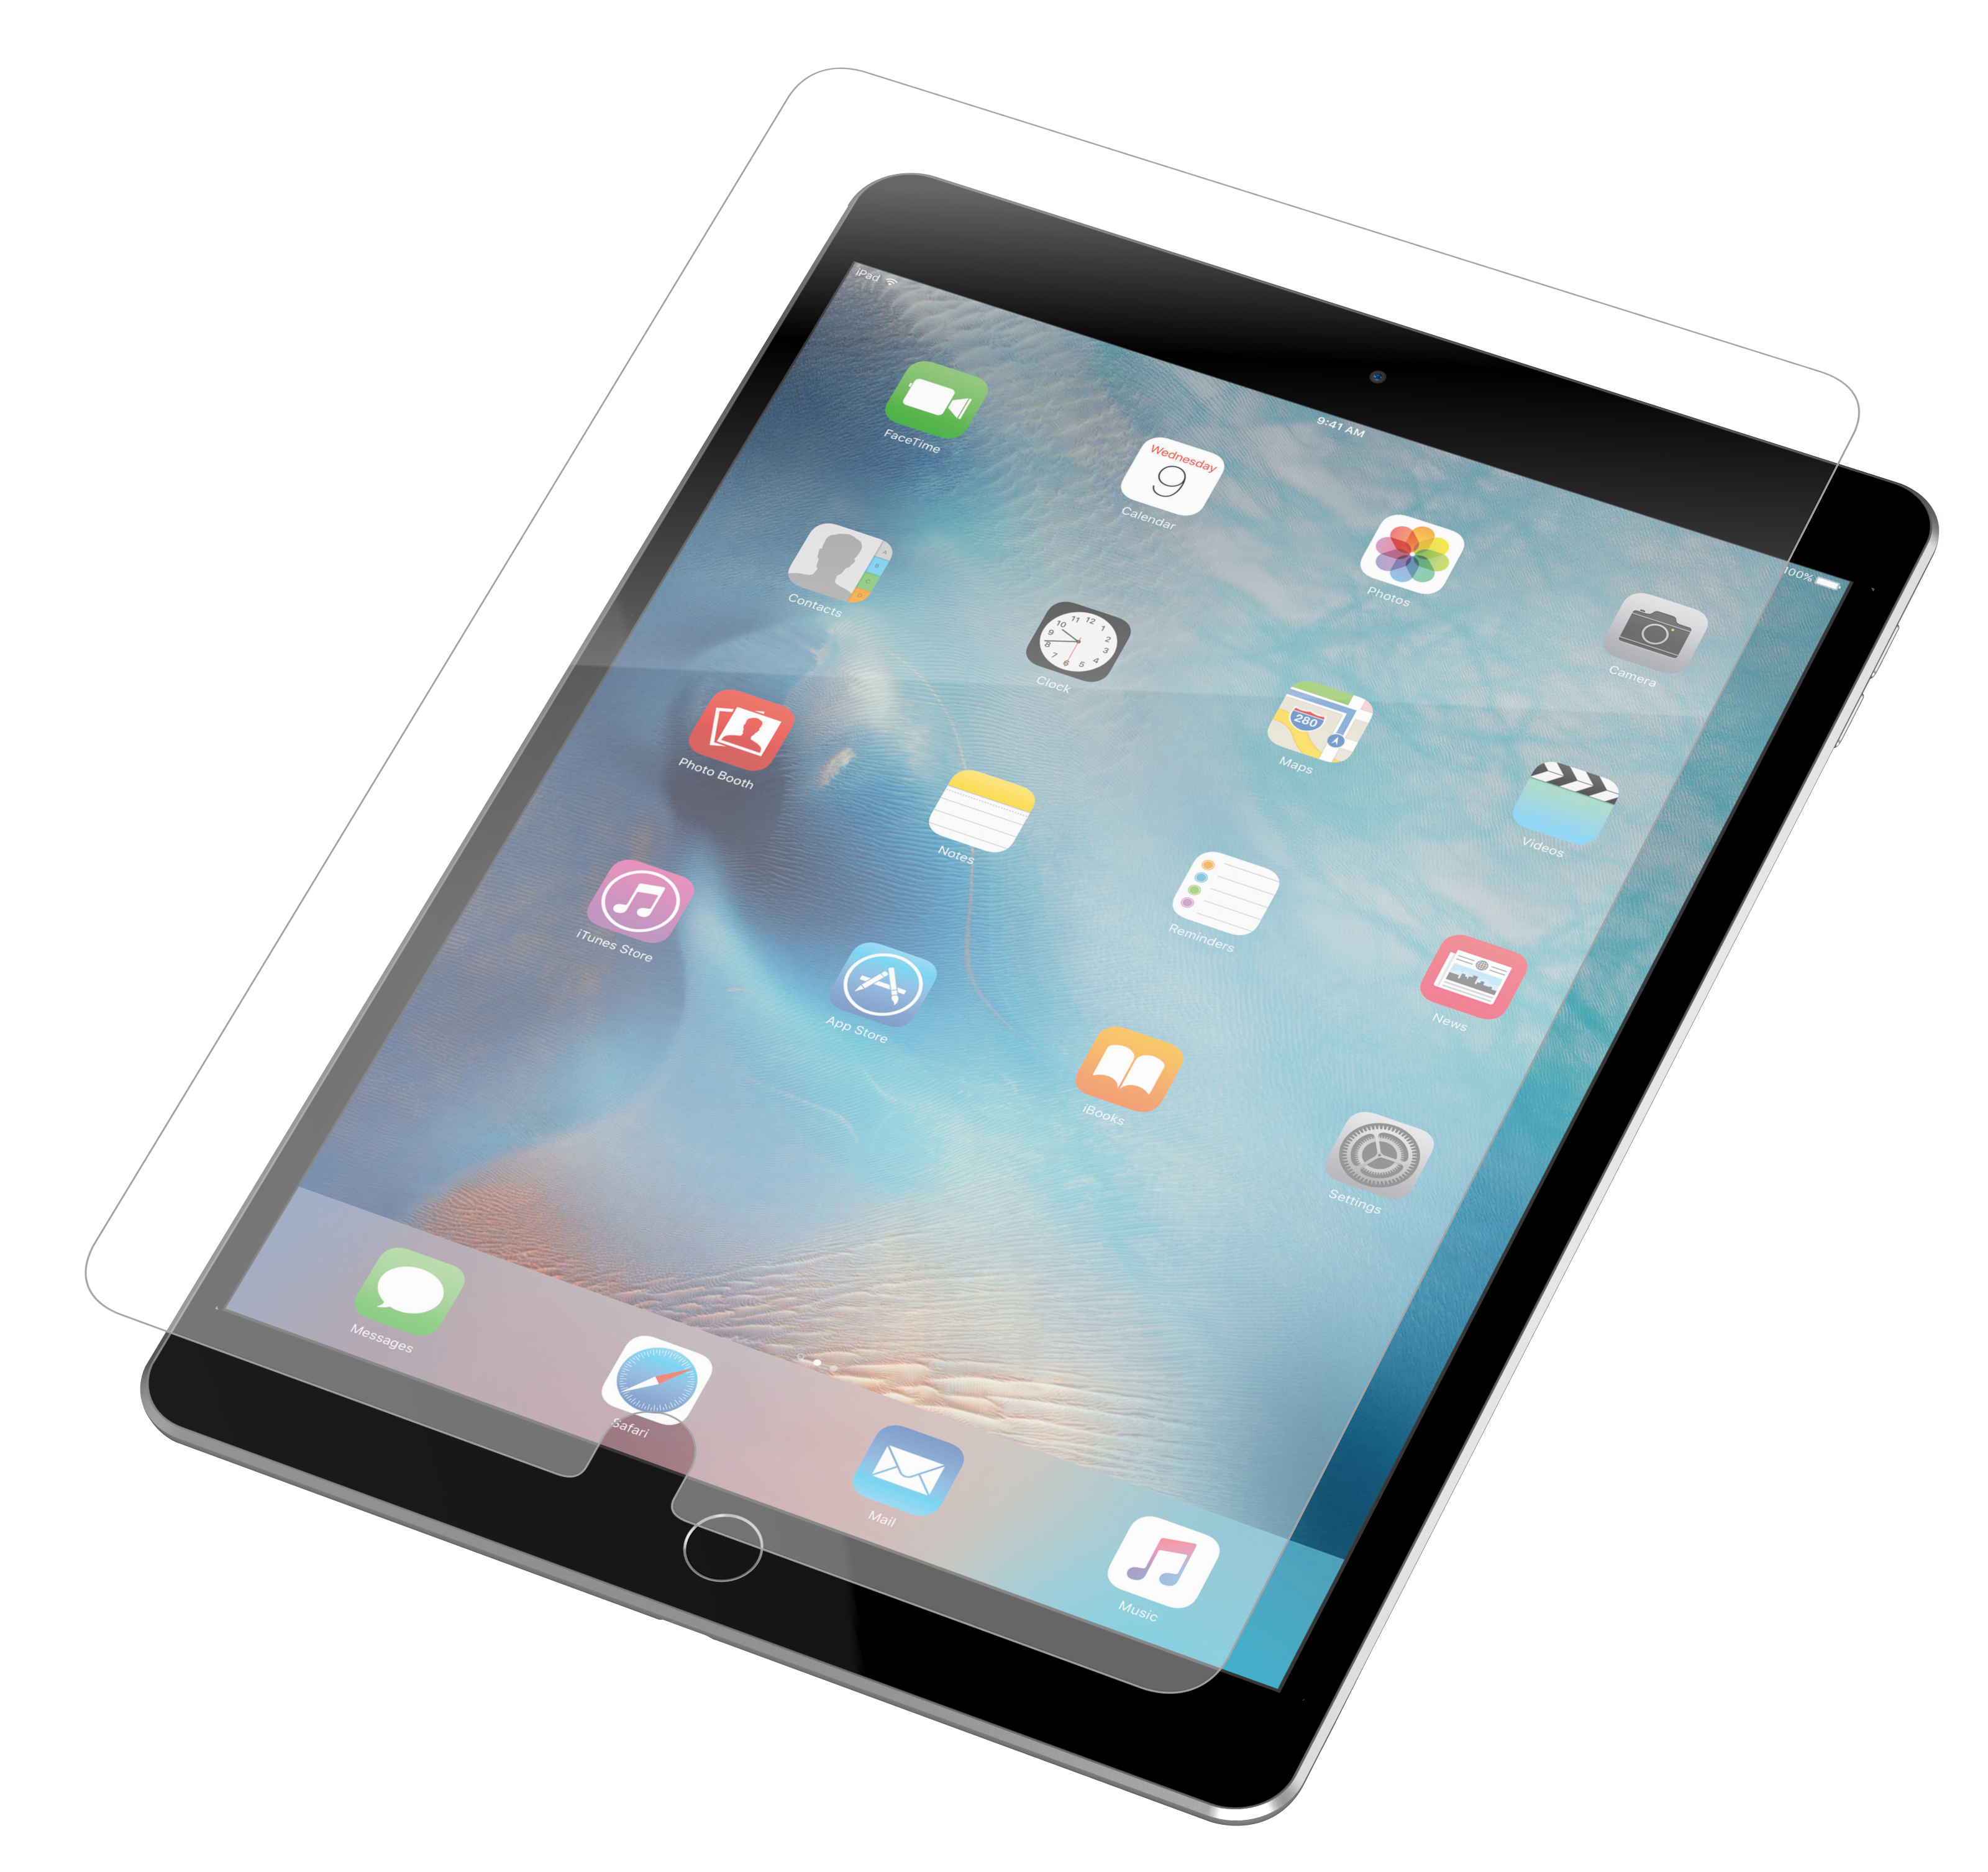 Zagg Invisible Shield Glass Plus Screen Protector For iPad Air 2, iPad Pro 9.7-Inch, And iPad 9.7-Inch 2017